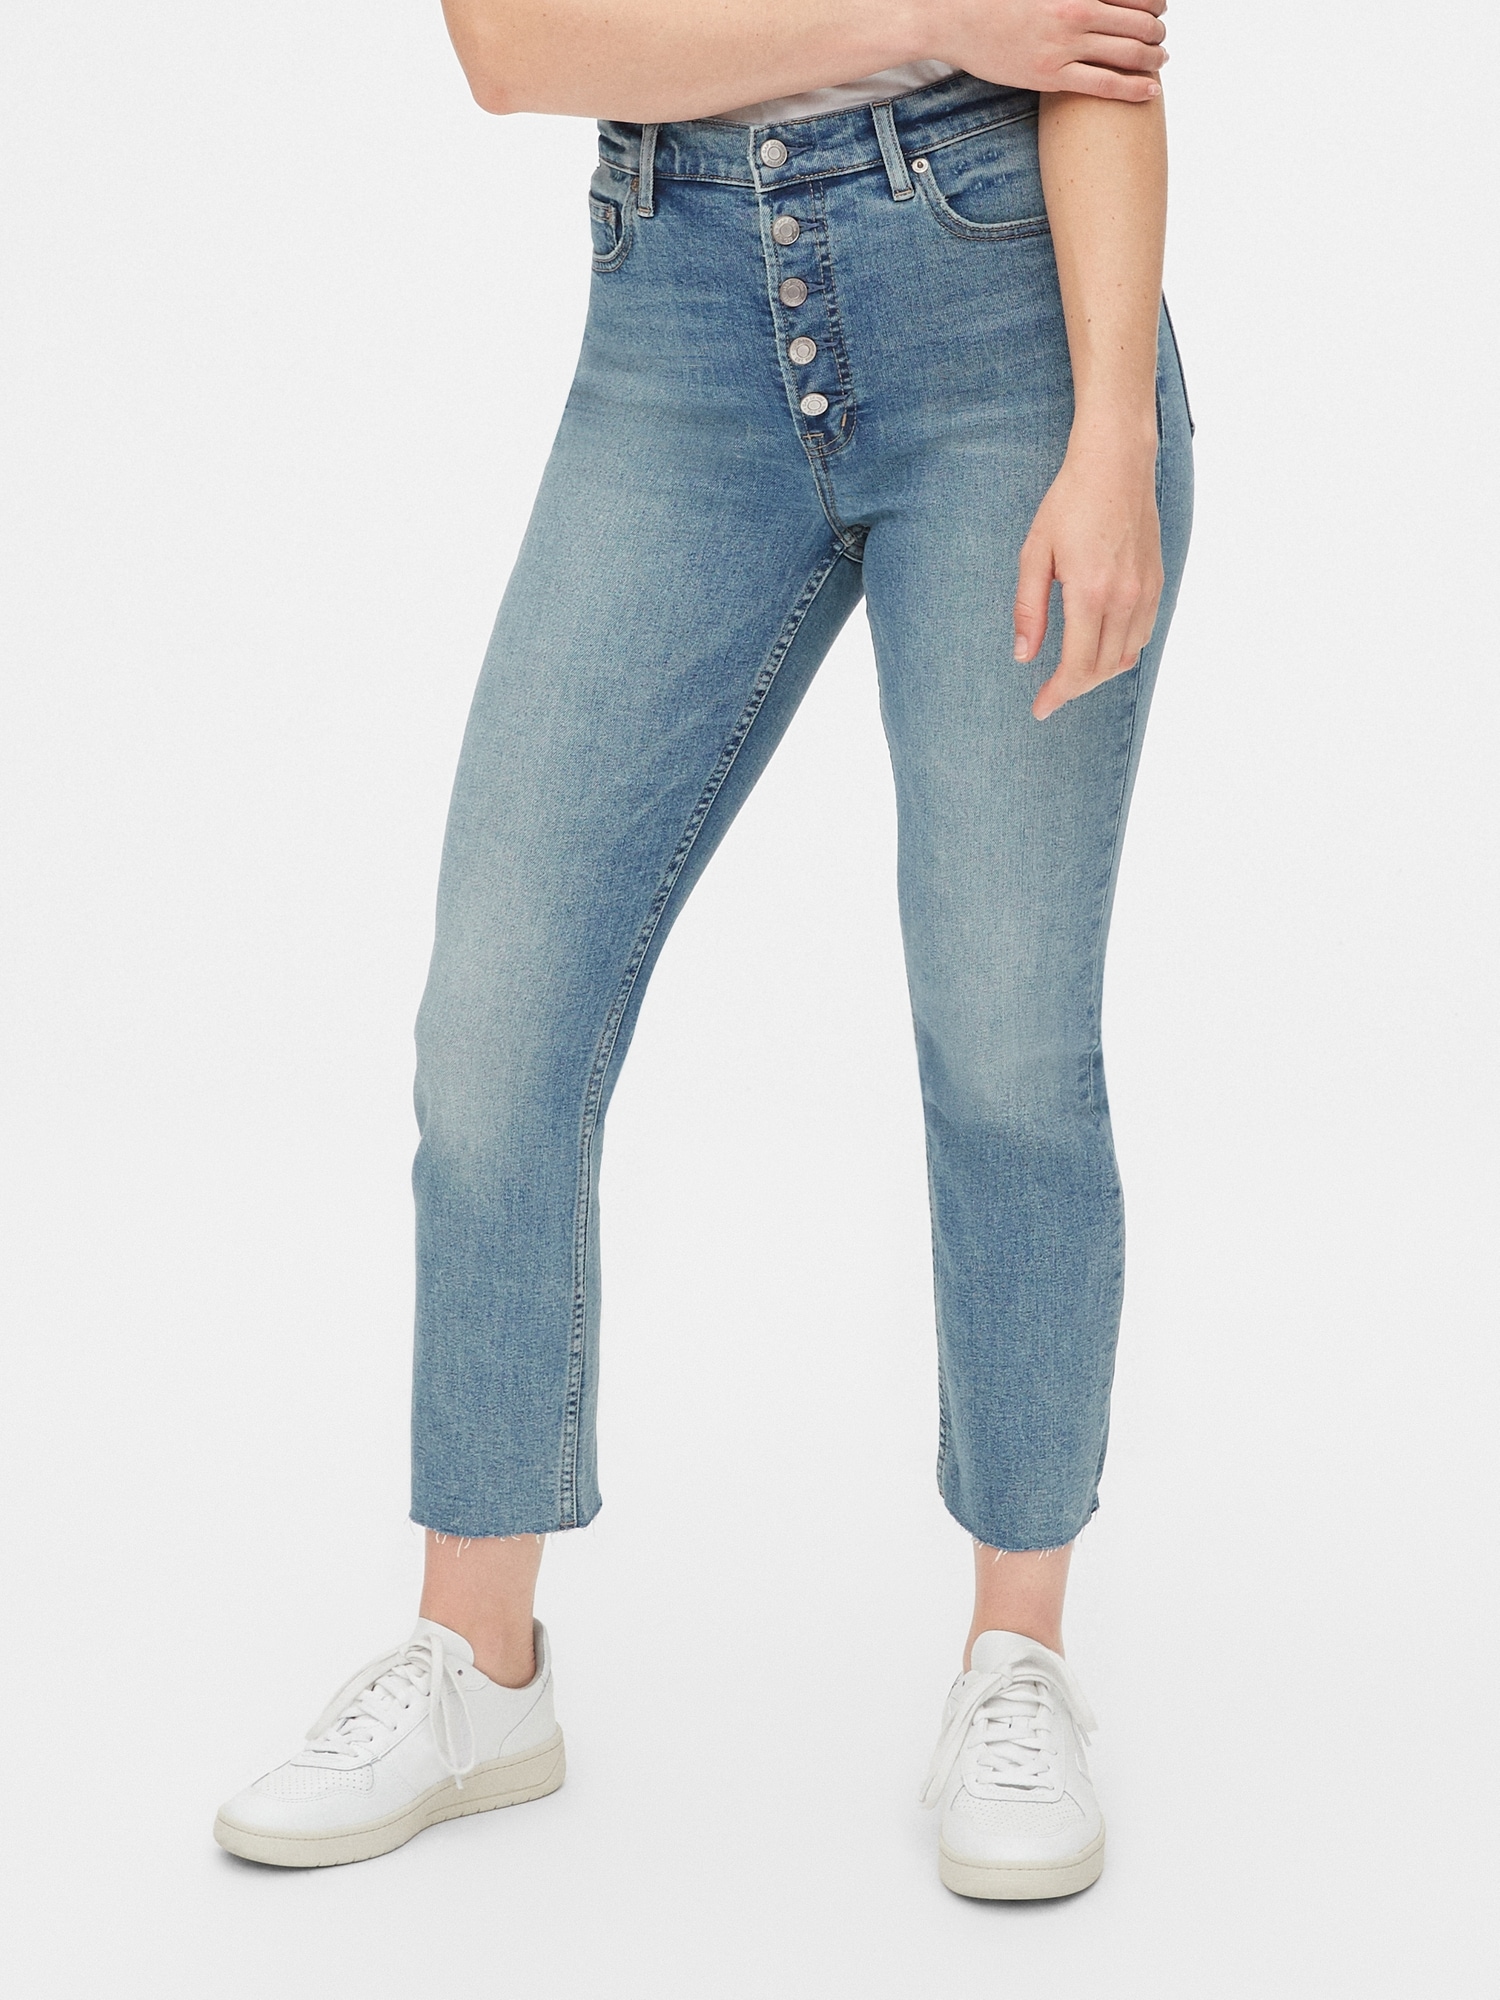 5 button high waisted jeans